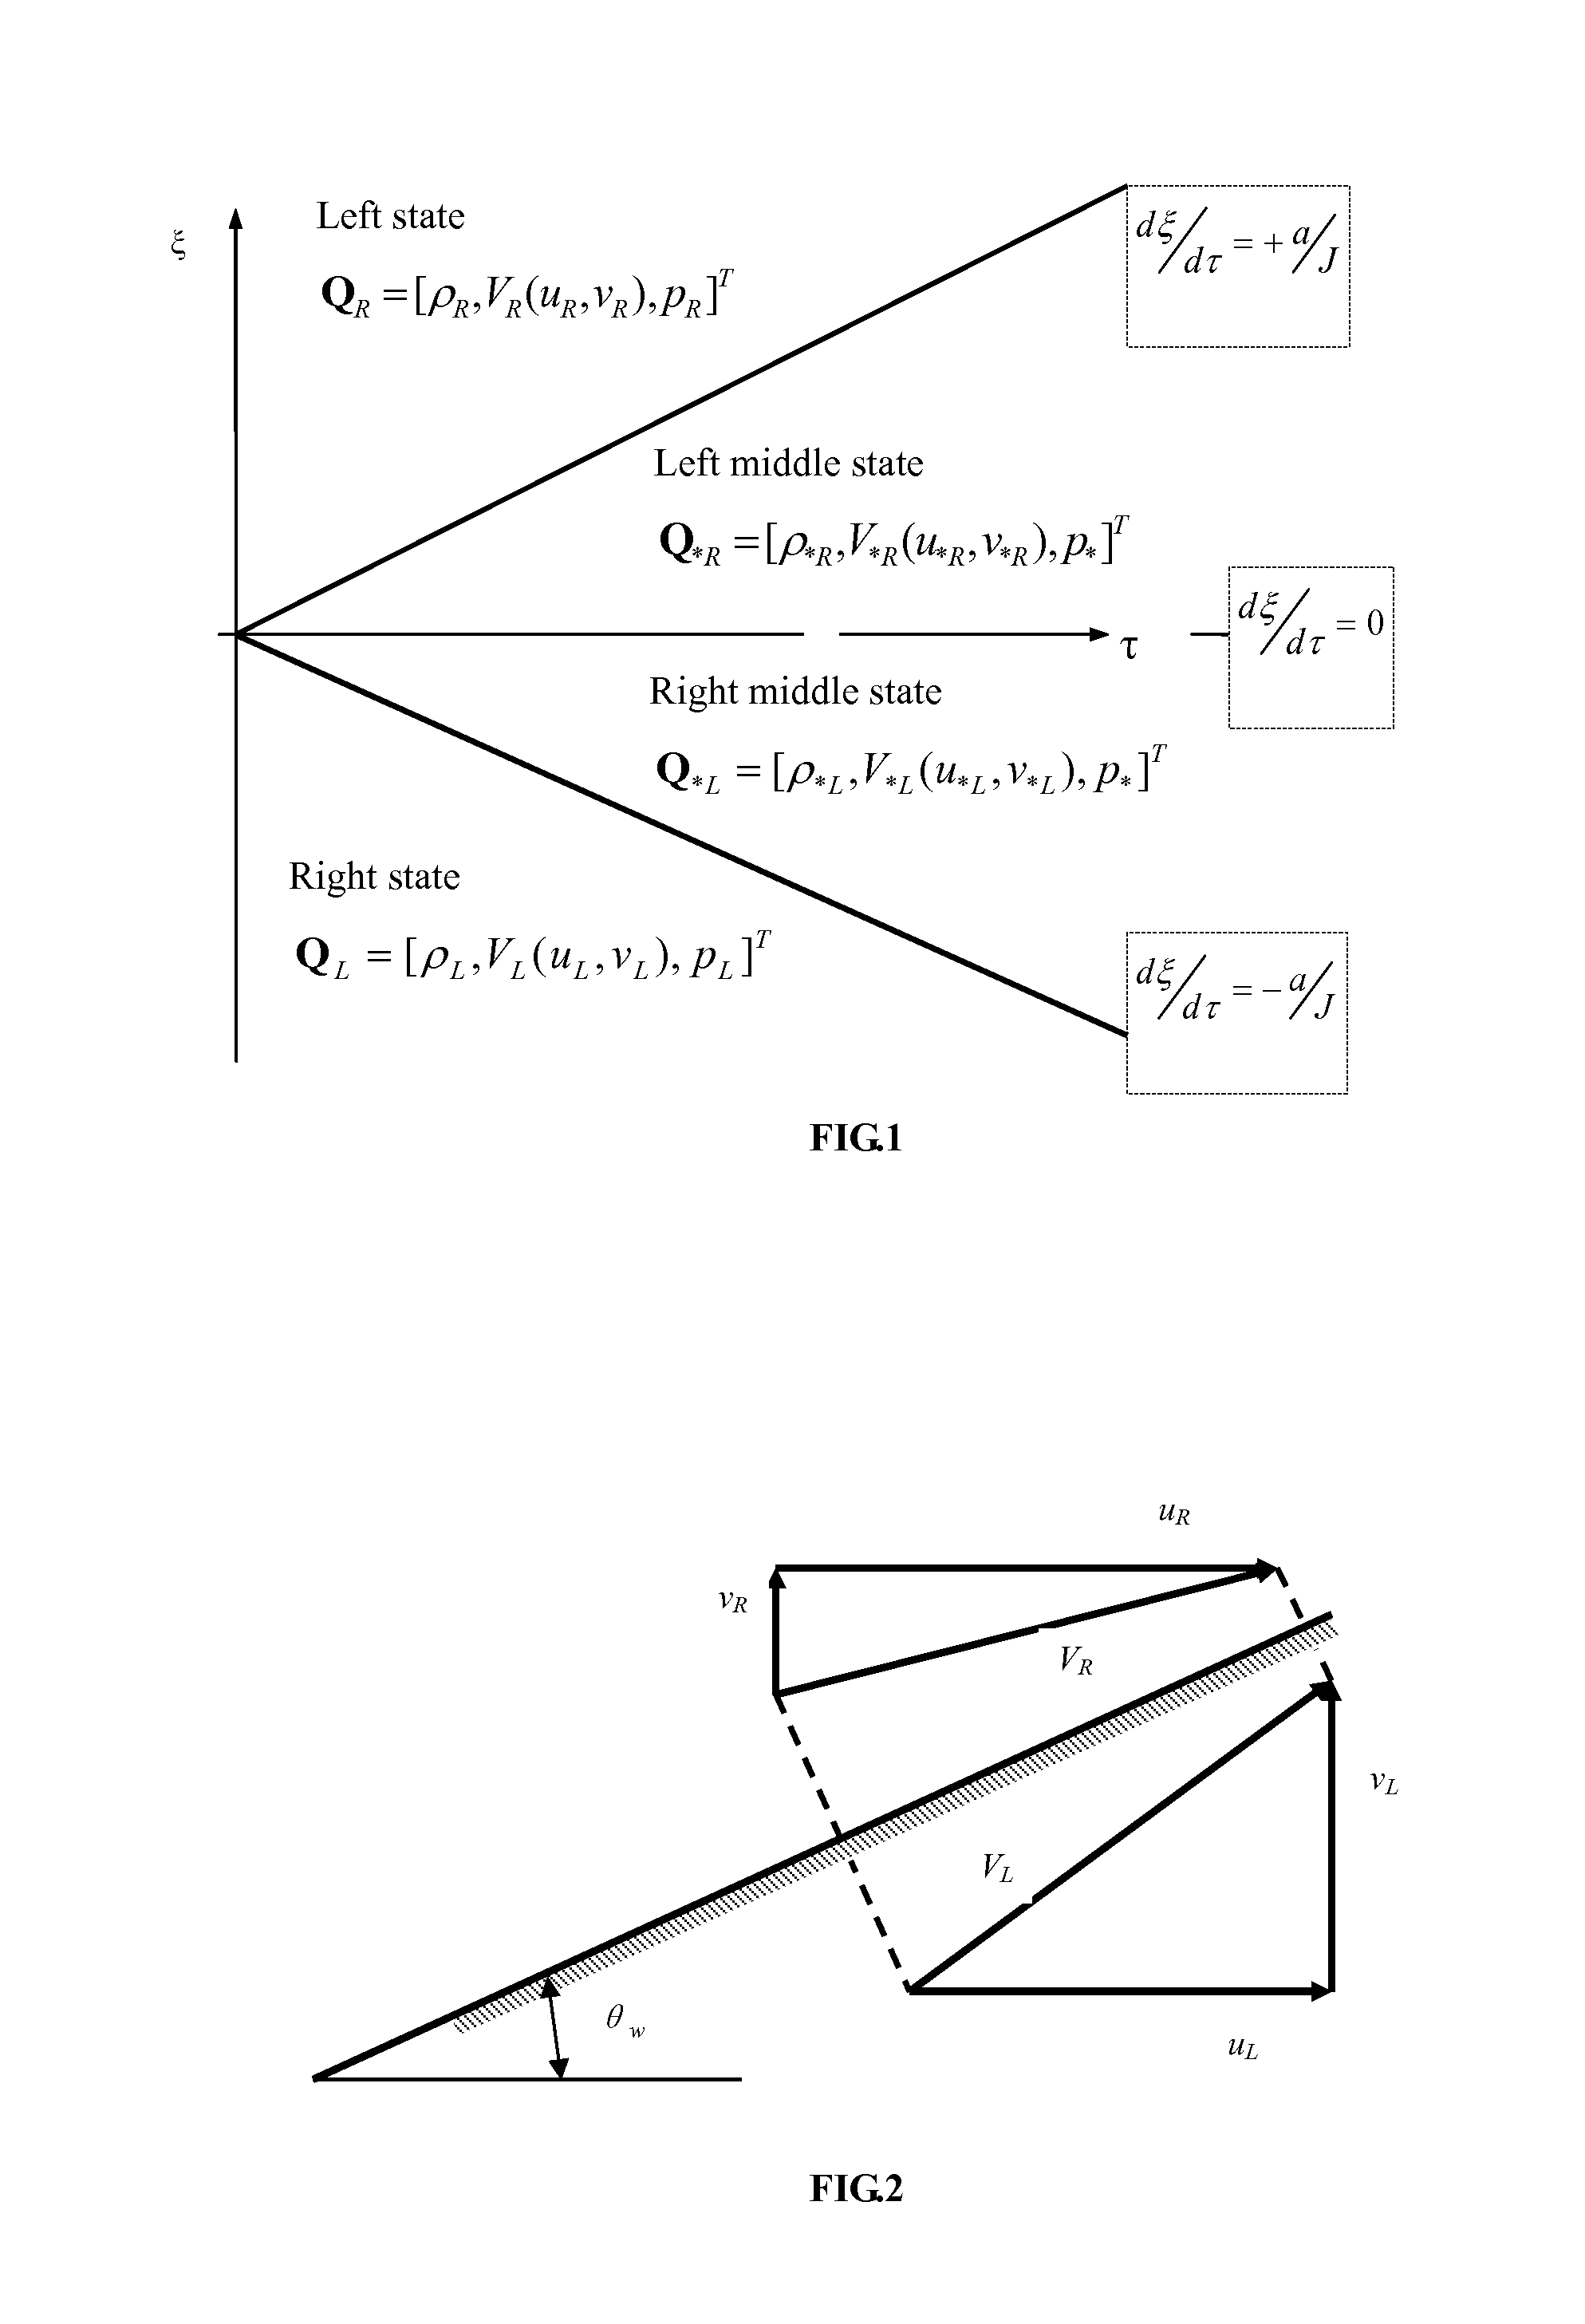 Numerical method for solving an inverse problem in subsonic flows